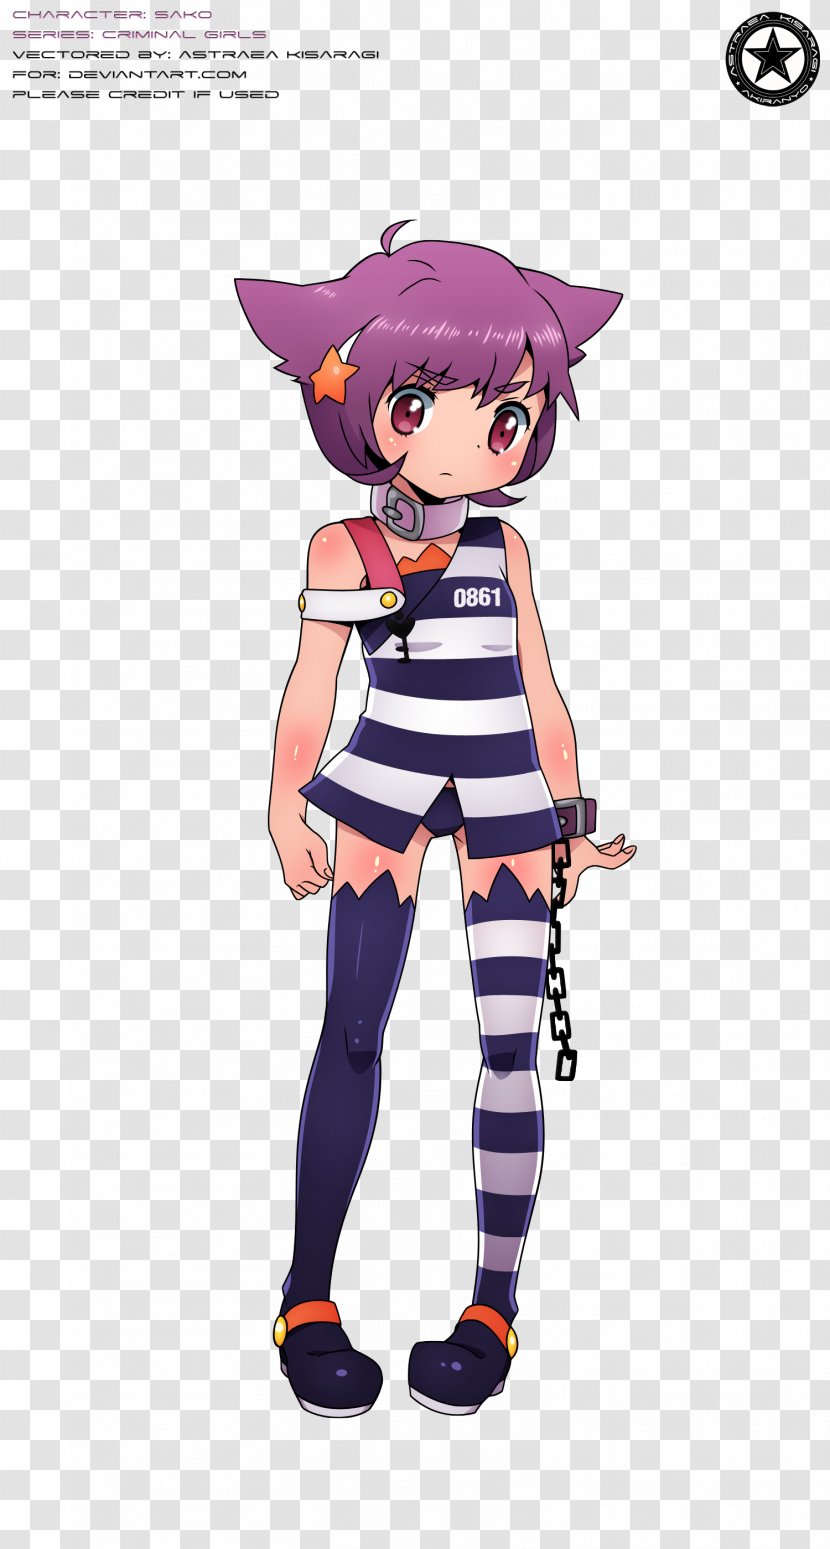 Crime Drawing Character TV Tropes Sentence - Heart - Criminal Girls Invite Only Transparent PNG